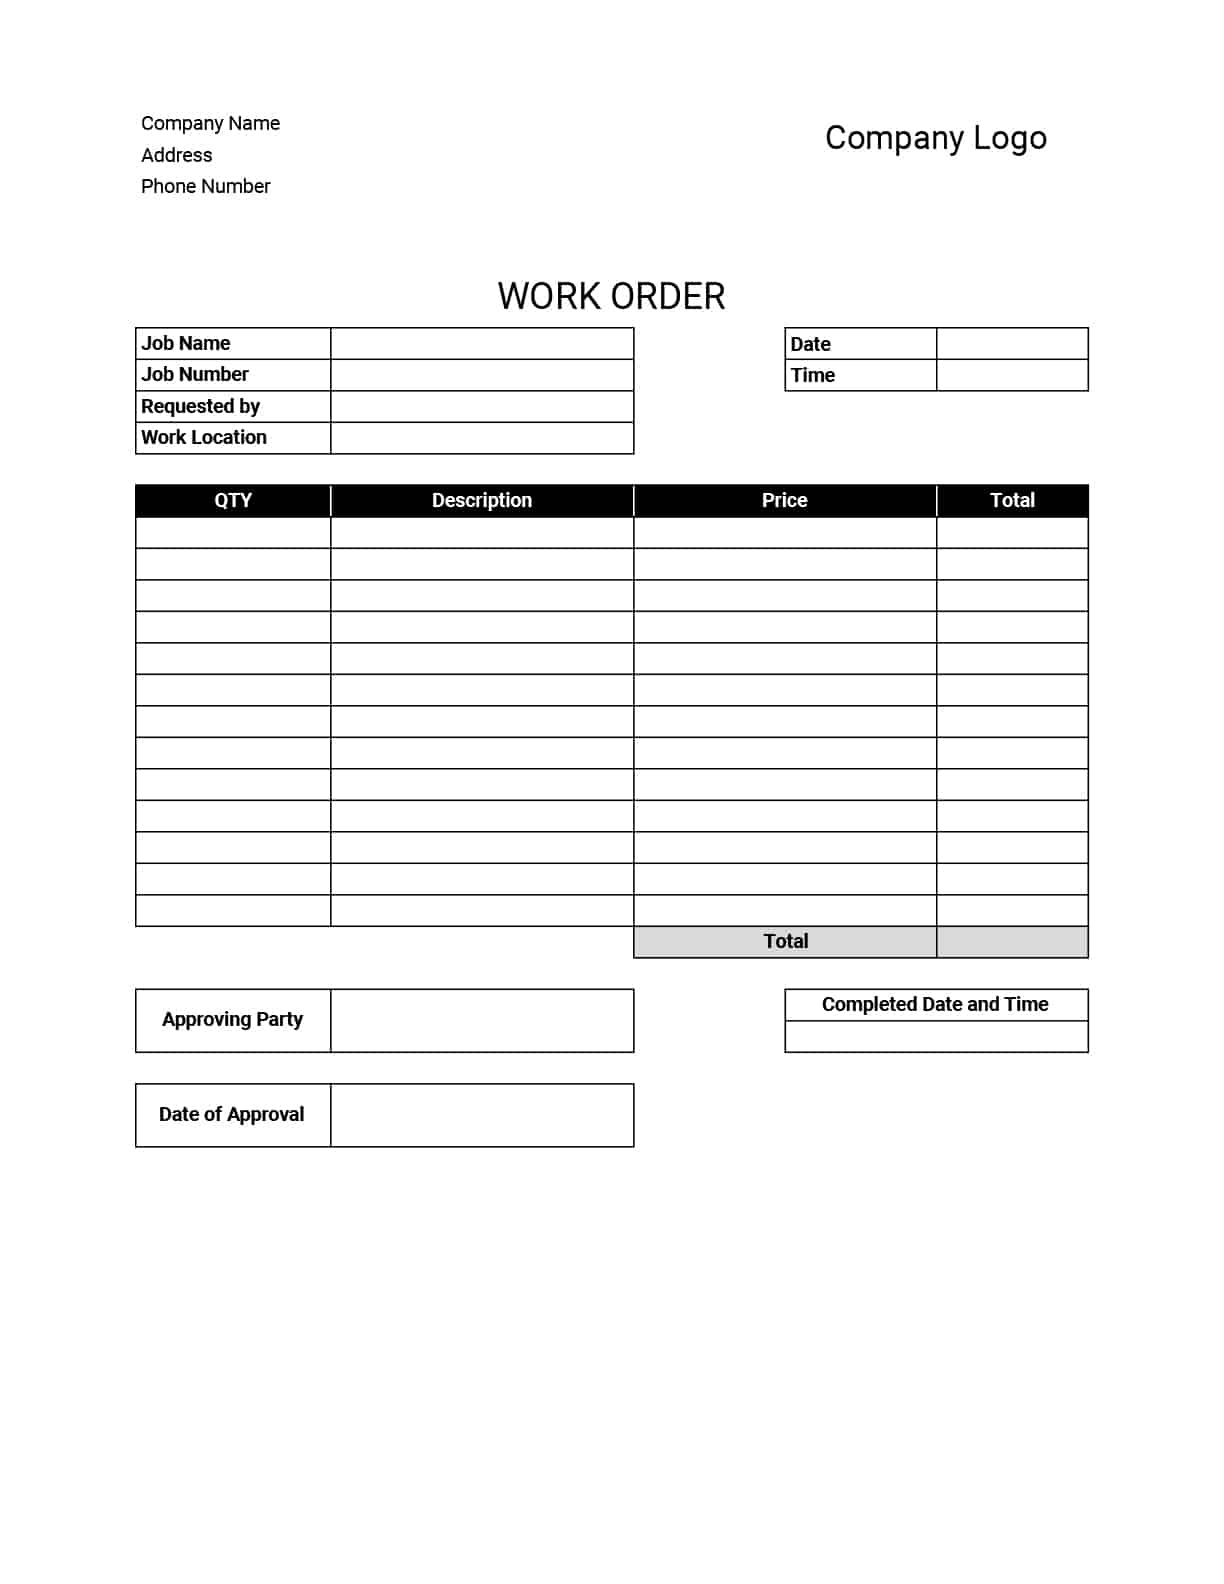 Work Order Templates Download & Print for Free!